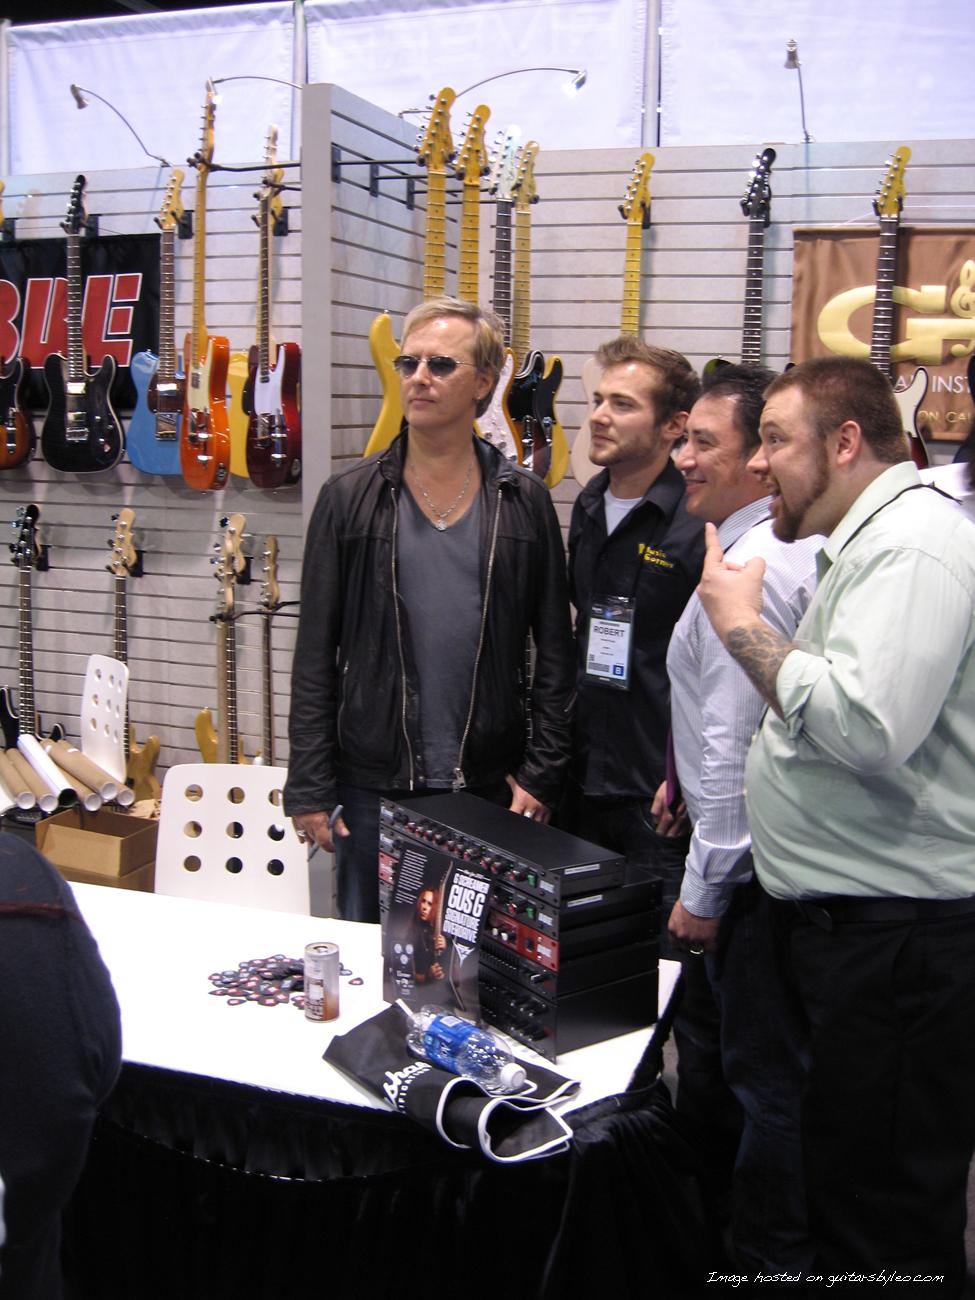 Jerry Cantrell posing with some fans during his signing session at the booth